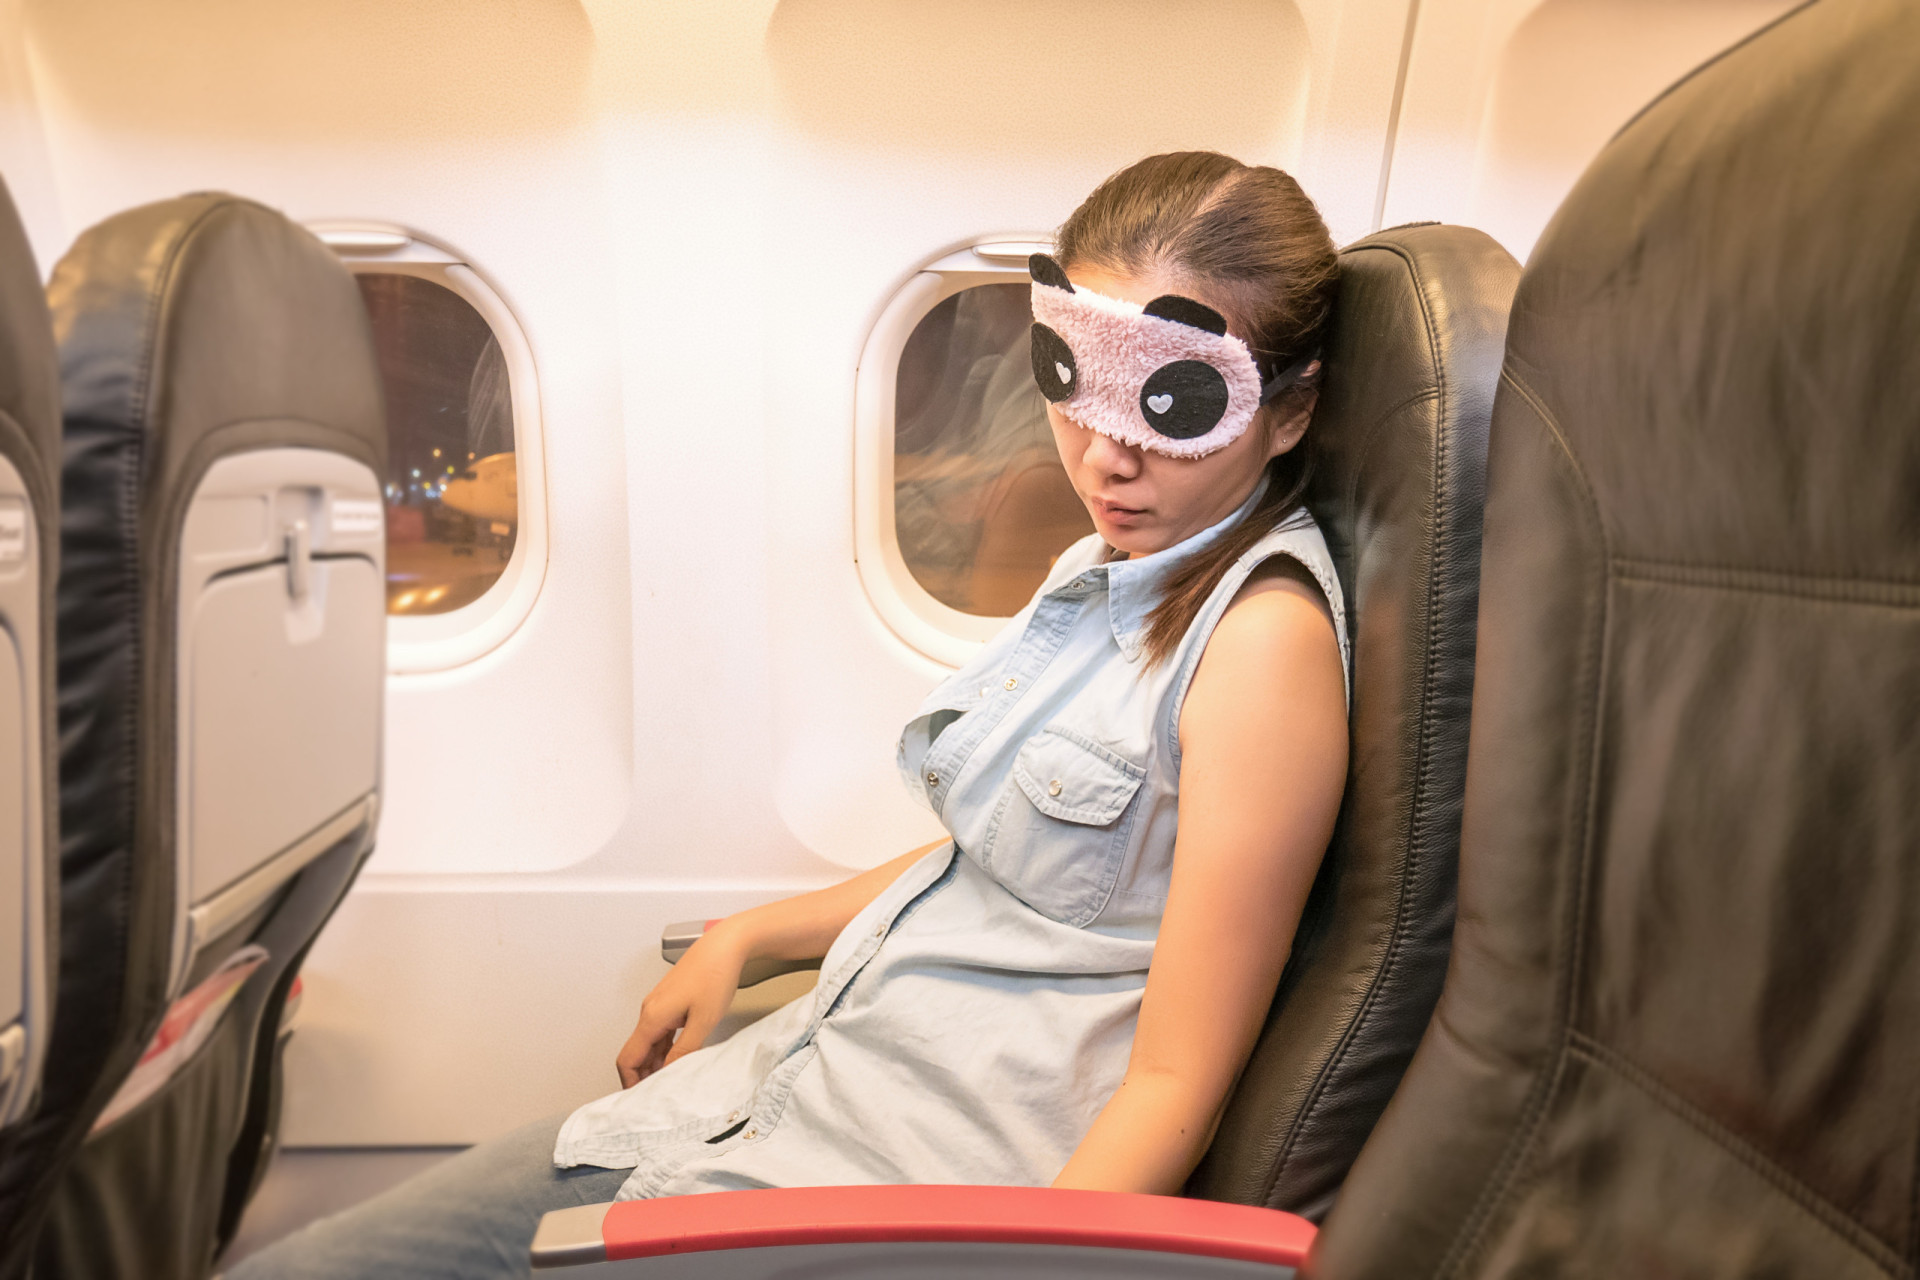 <p>Finally, there's the jet lag, which is especially true for visitors from Japan. Add that to the mix and it's no wonder why someone would be stressed out.</p><p><a href="https://www.msn.com/en-us/community/channel/vid-7xx8mnucu55yw63we9va2gwr7uihbxwc68fxqp25x6tg4ftibpra?cvid=94631541bc0f4f89bfd59158d696ad7e">Follow us and access great exclusive content every day</a></p>